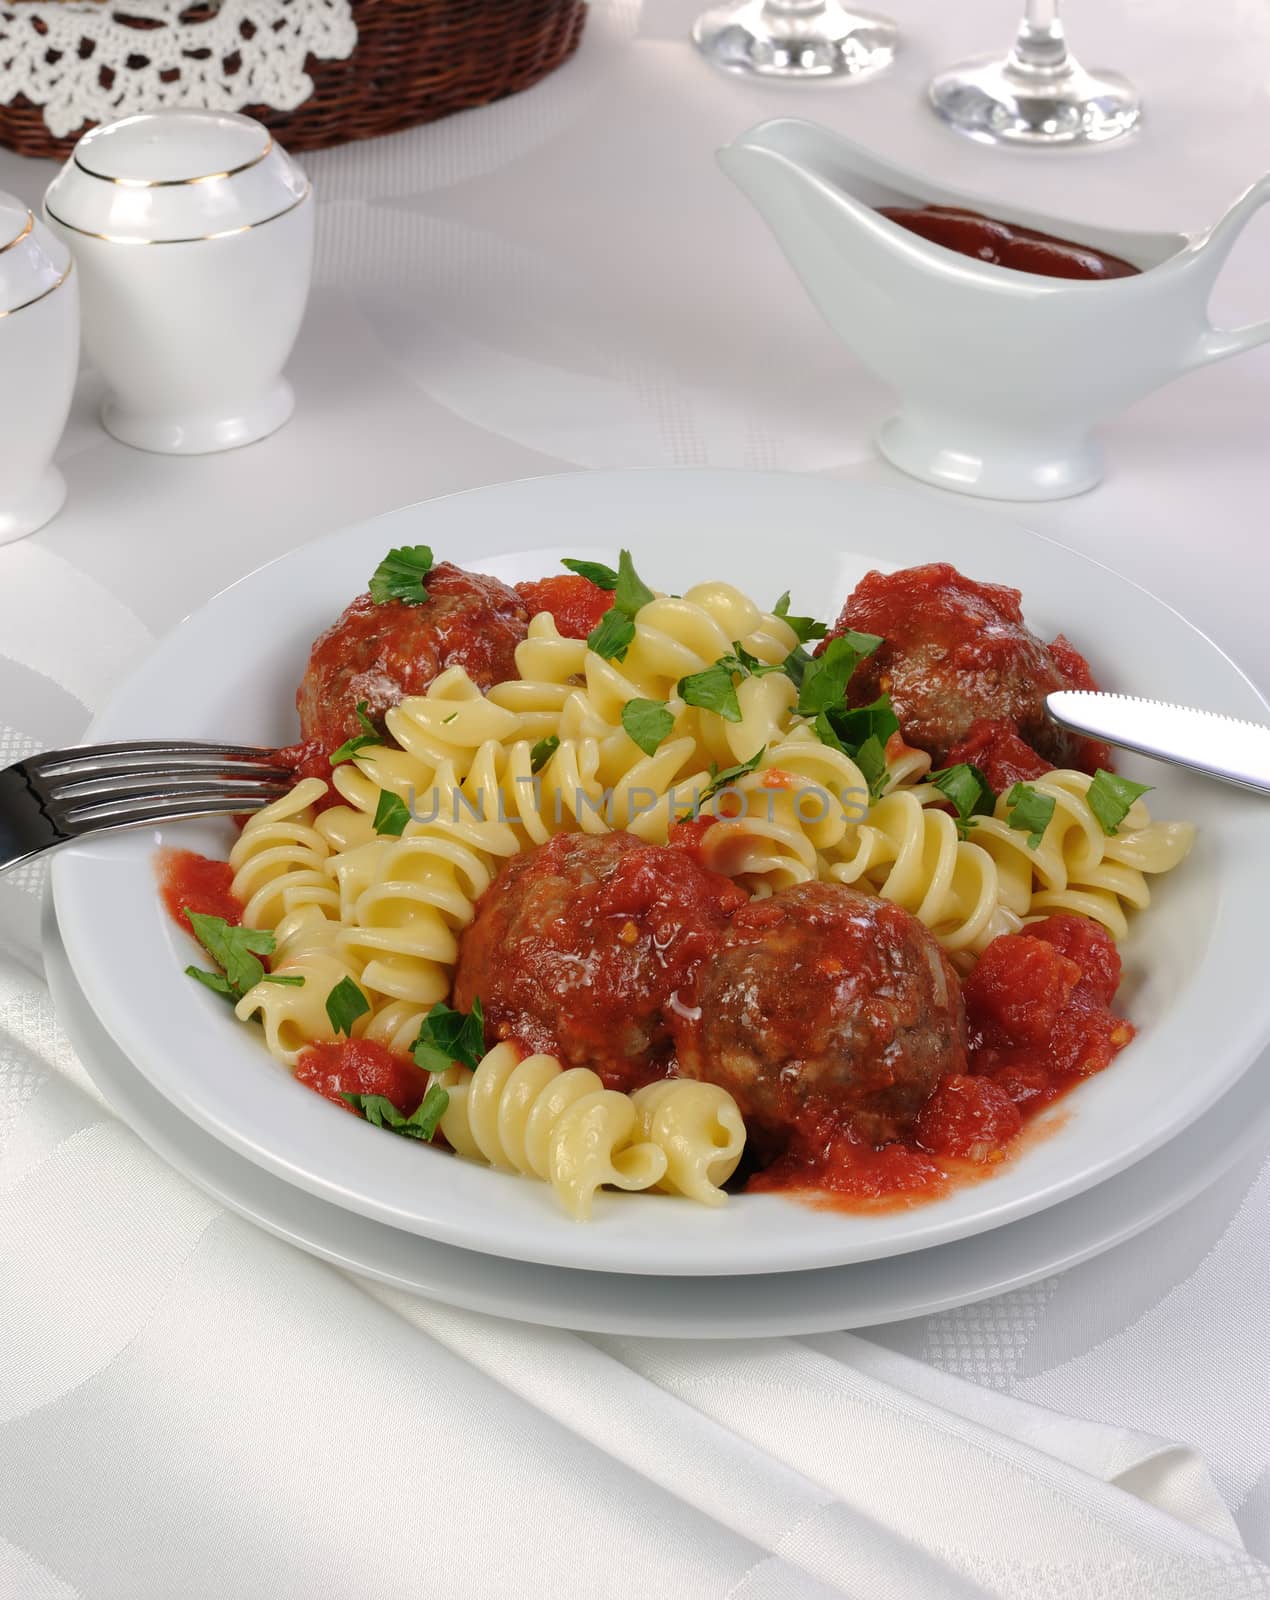 Pasta with meatballs in tomato sauce by Apolonia